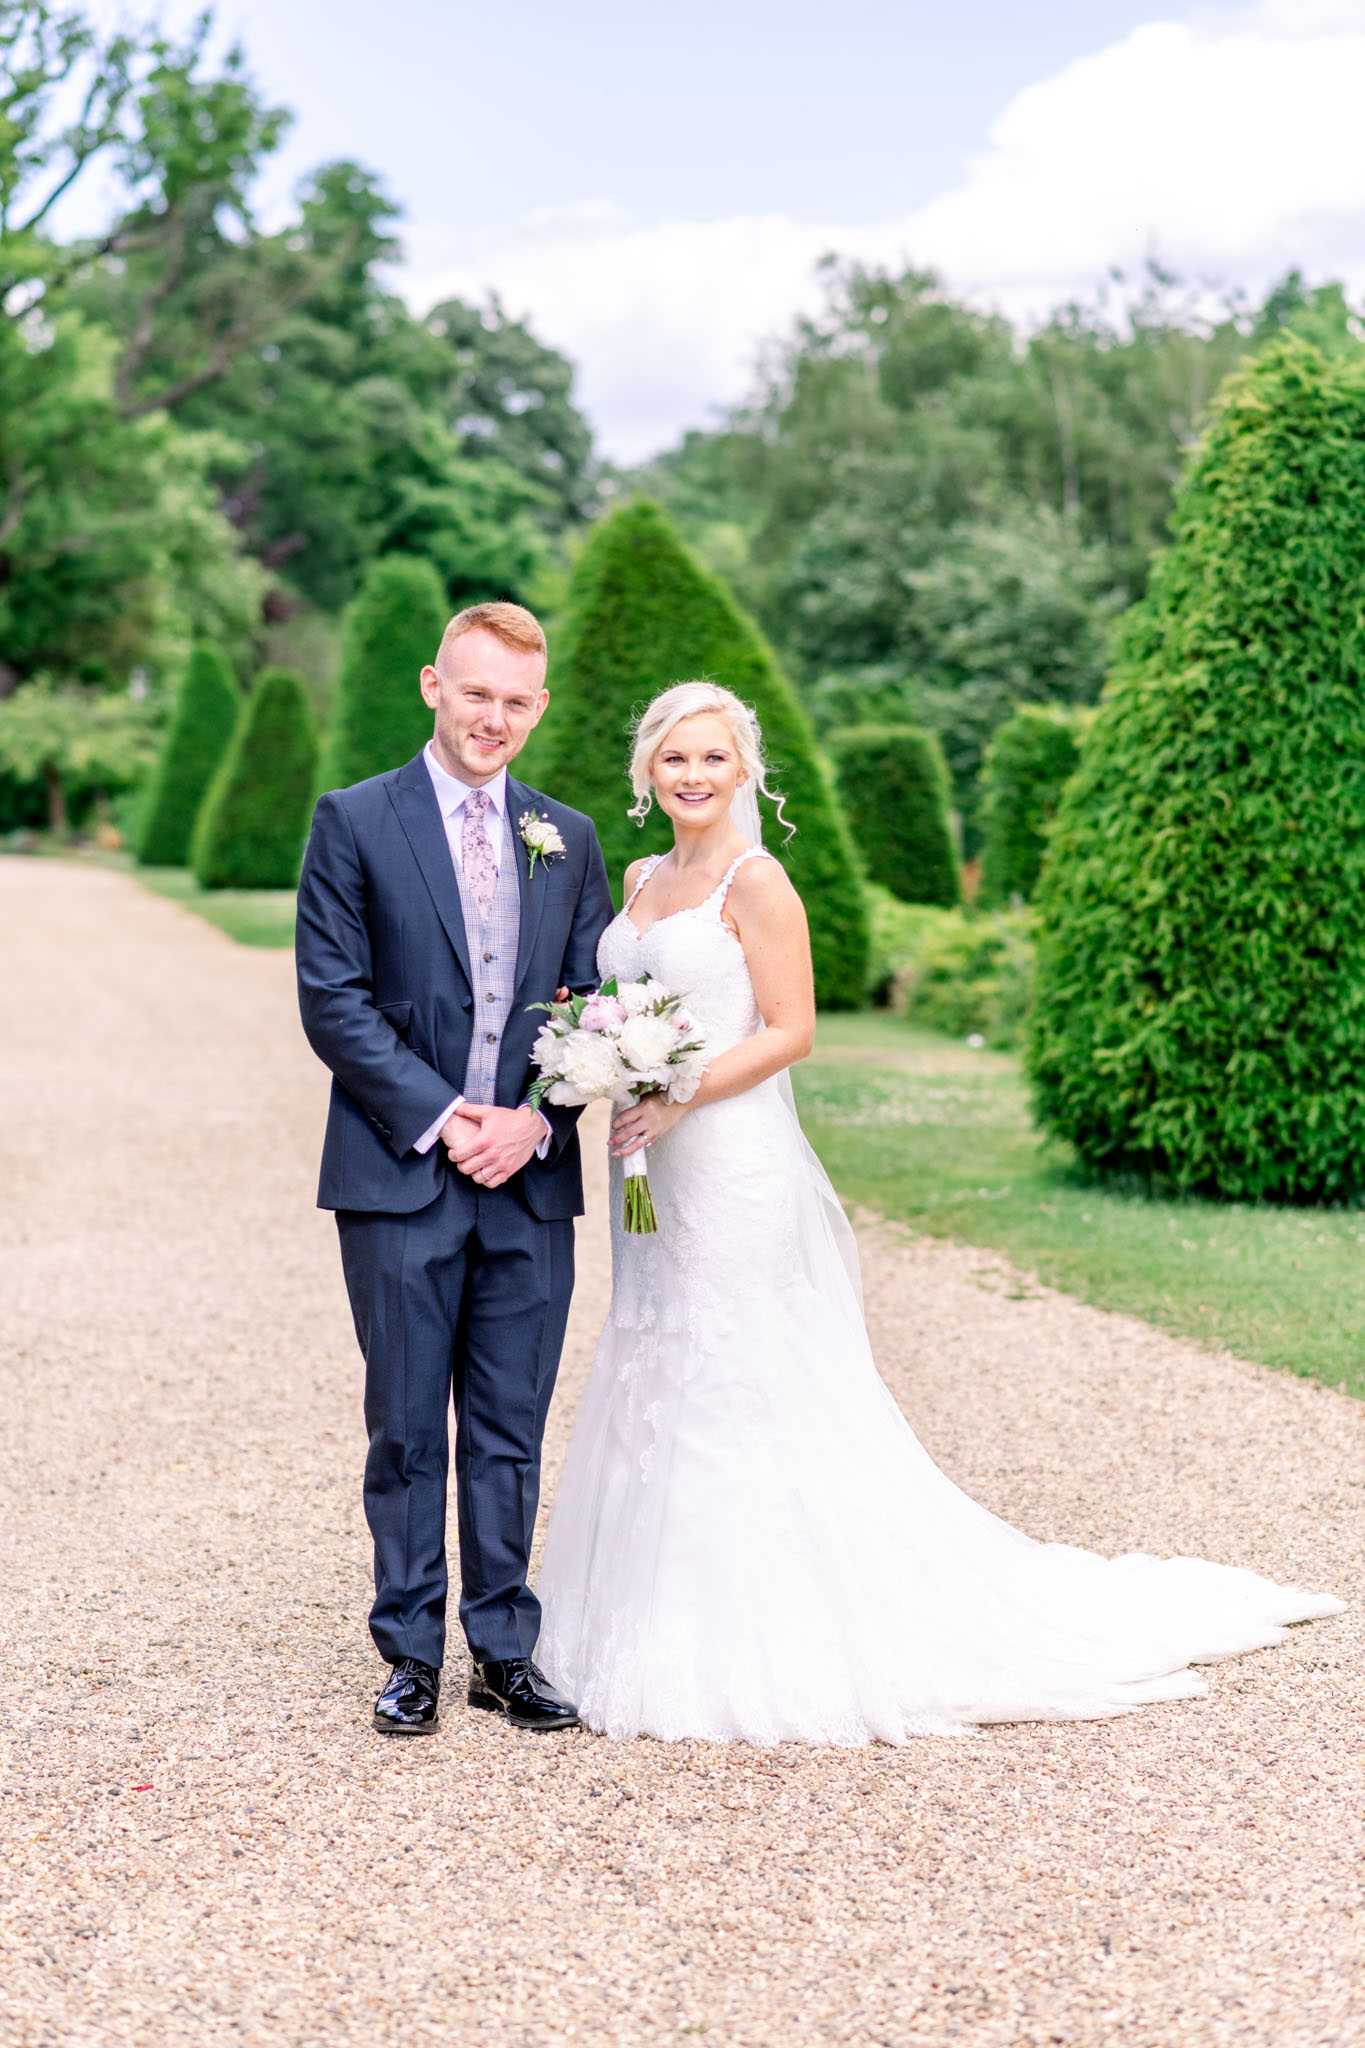 https://usercontent.one/wp/www.natalieandmax.co.uk/wp-content/uploads/2022/06/J-S-Hanbury-Manor-Wedding-Photography-by-Natalie-and-Max-Photo-and-Films-501.jpg?media=1711985334